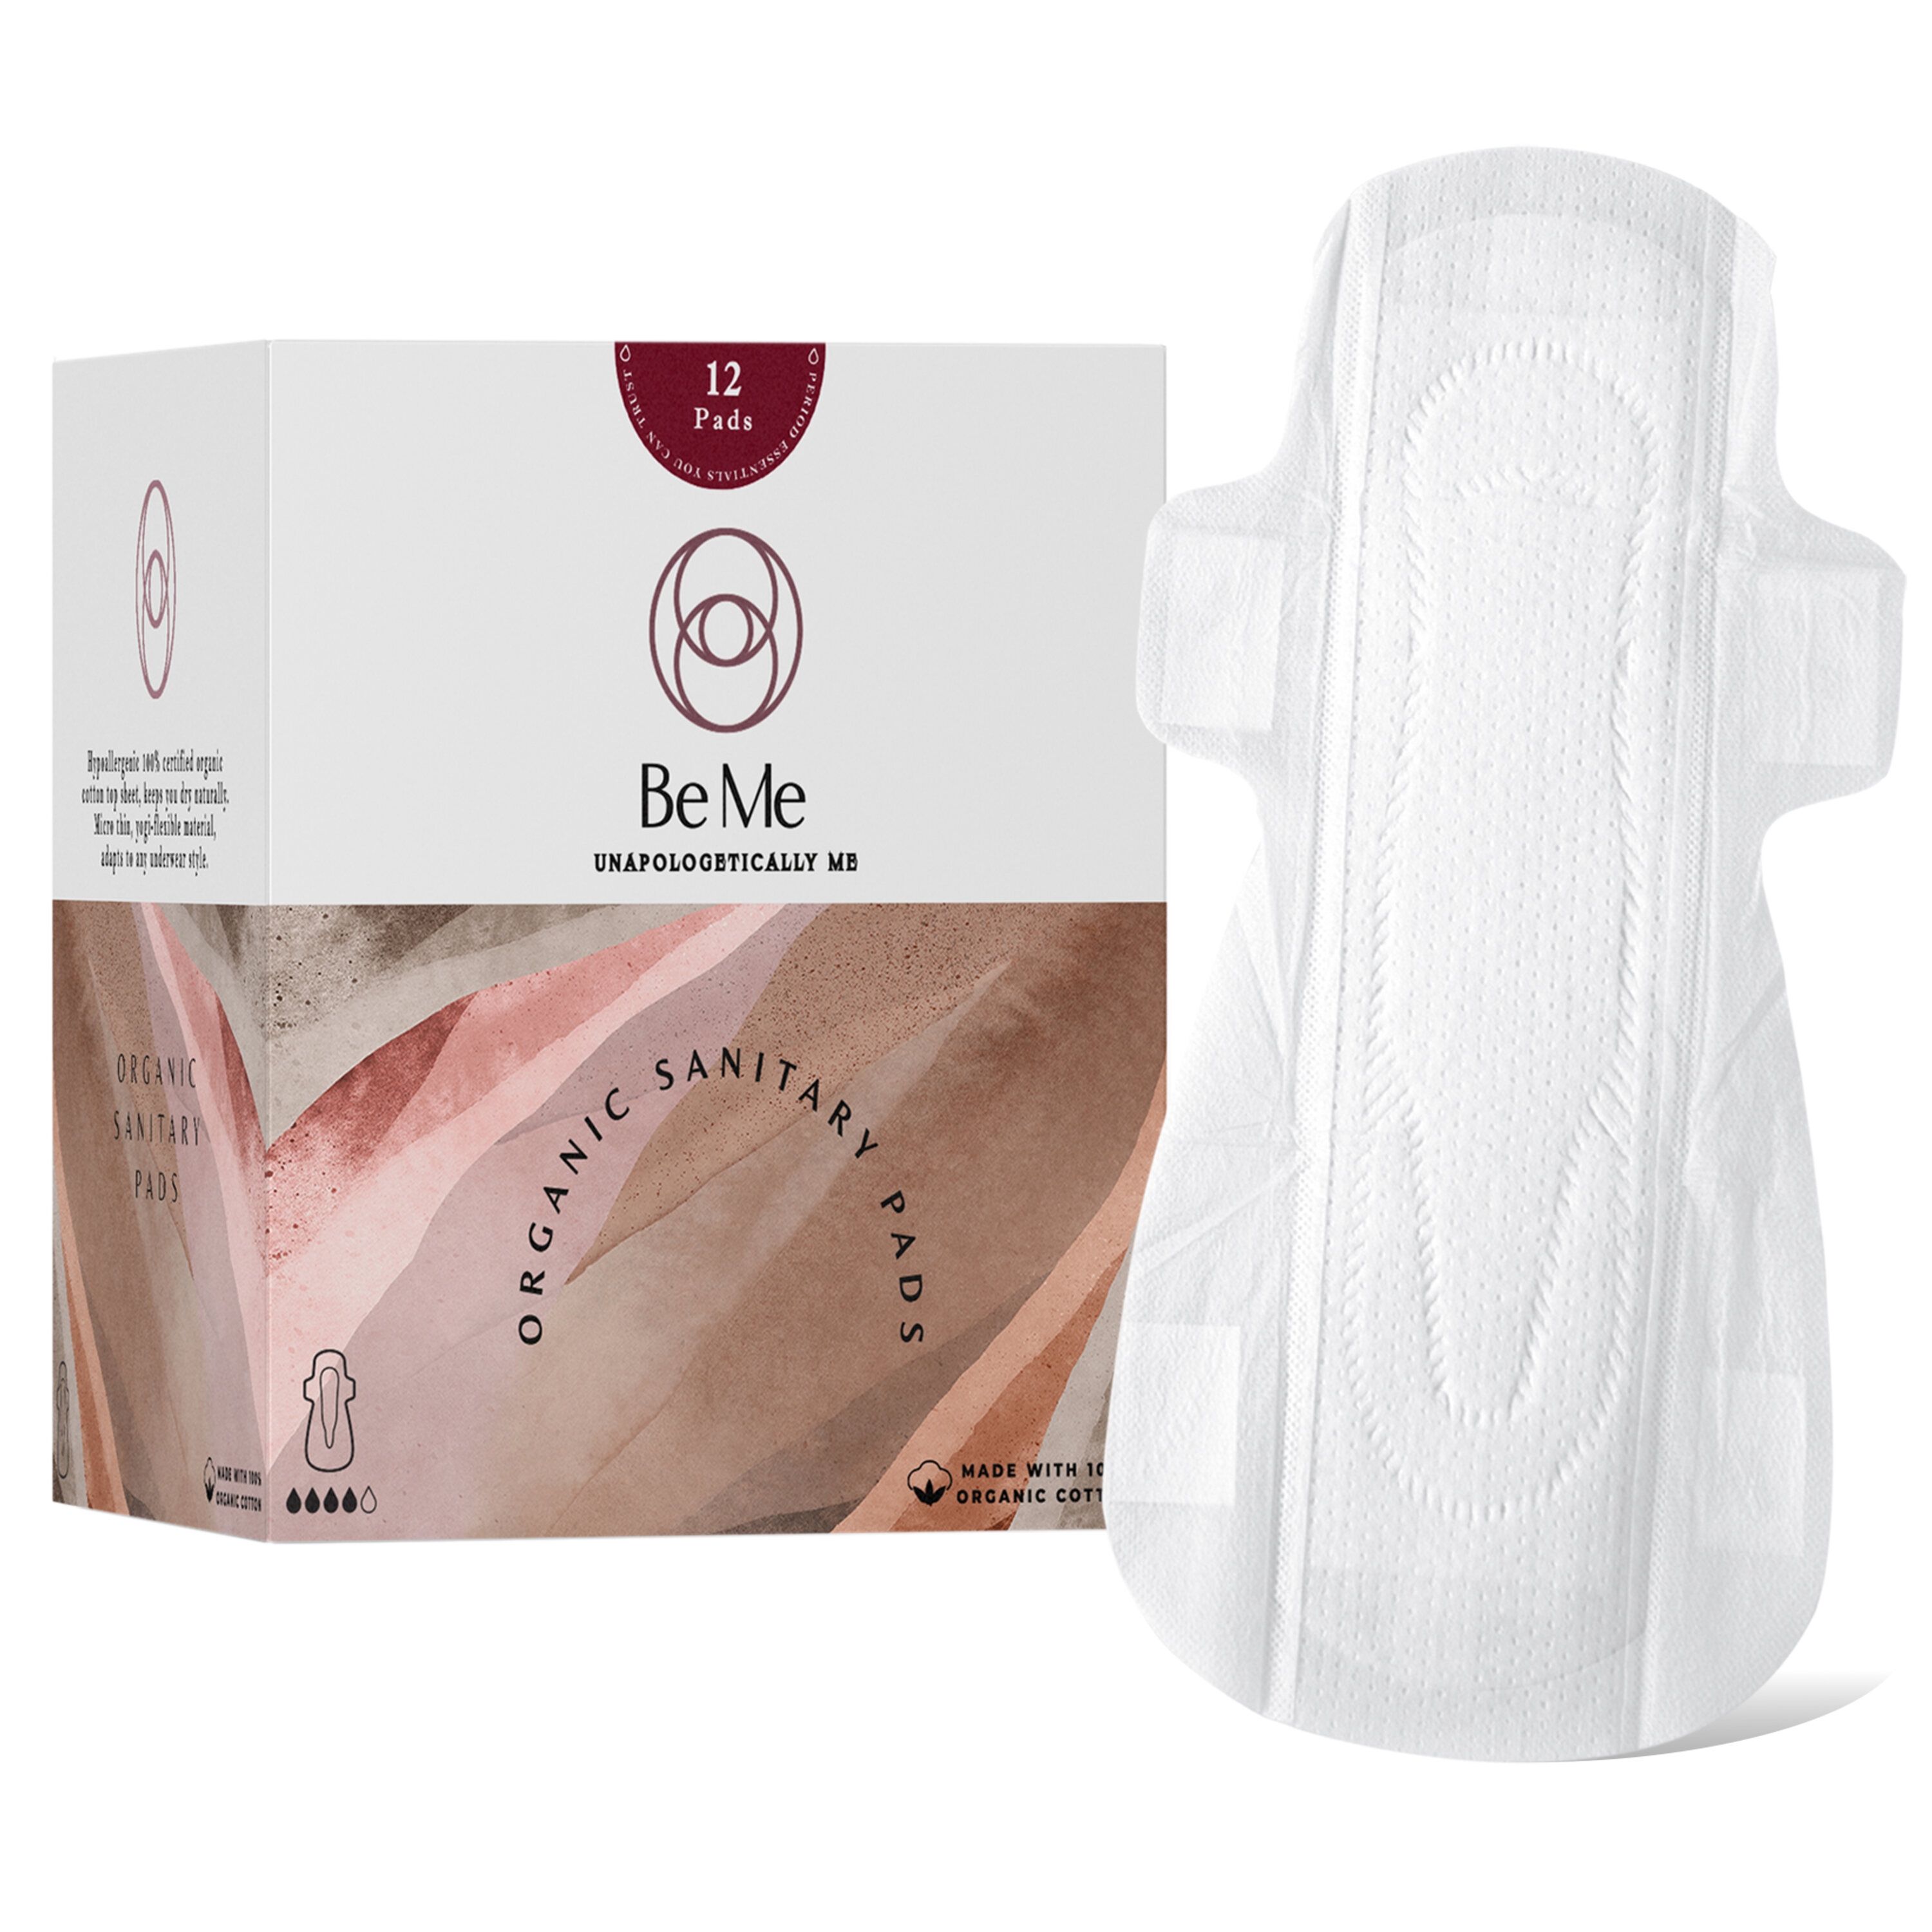 Be Me Sanitary Pads for Women, Regular- Pack of 12 Pads - With Brown Disposable Pouch